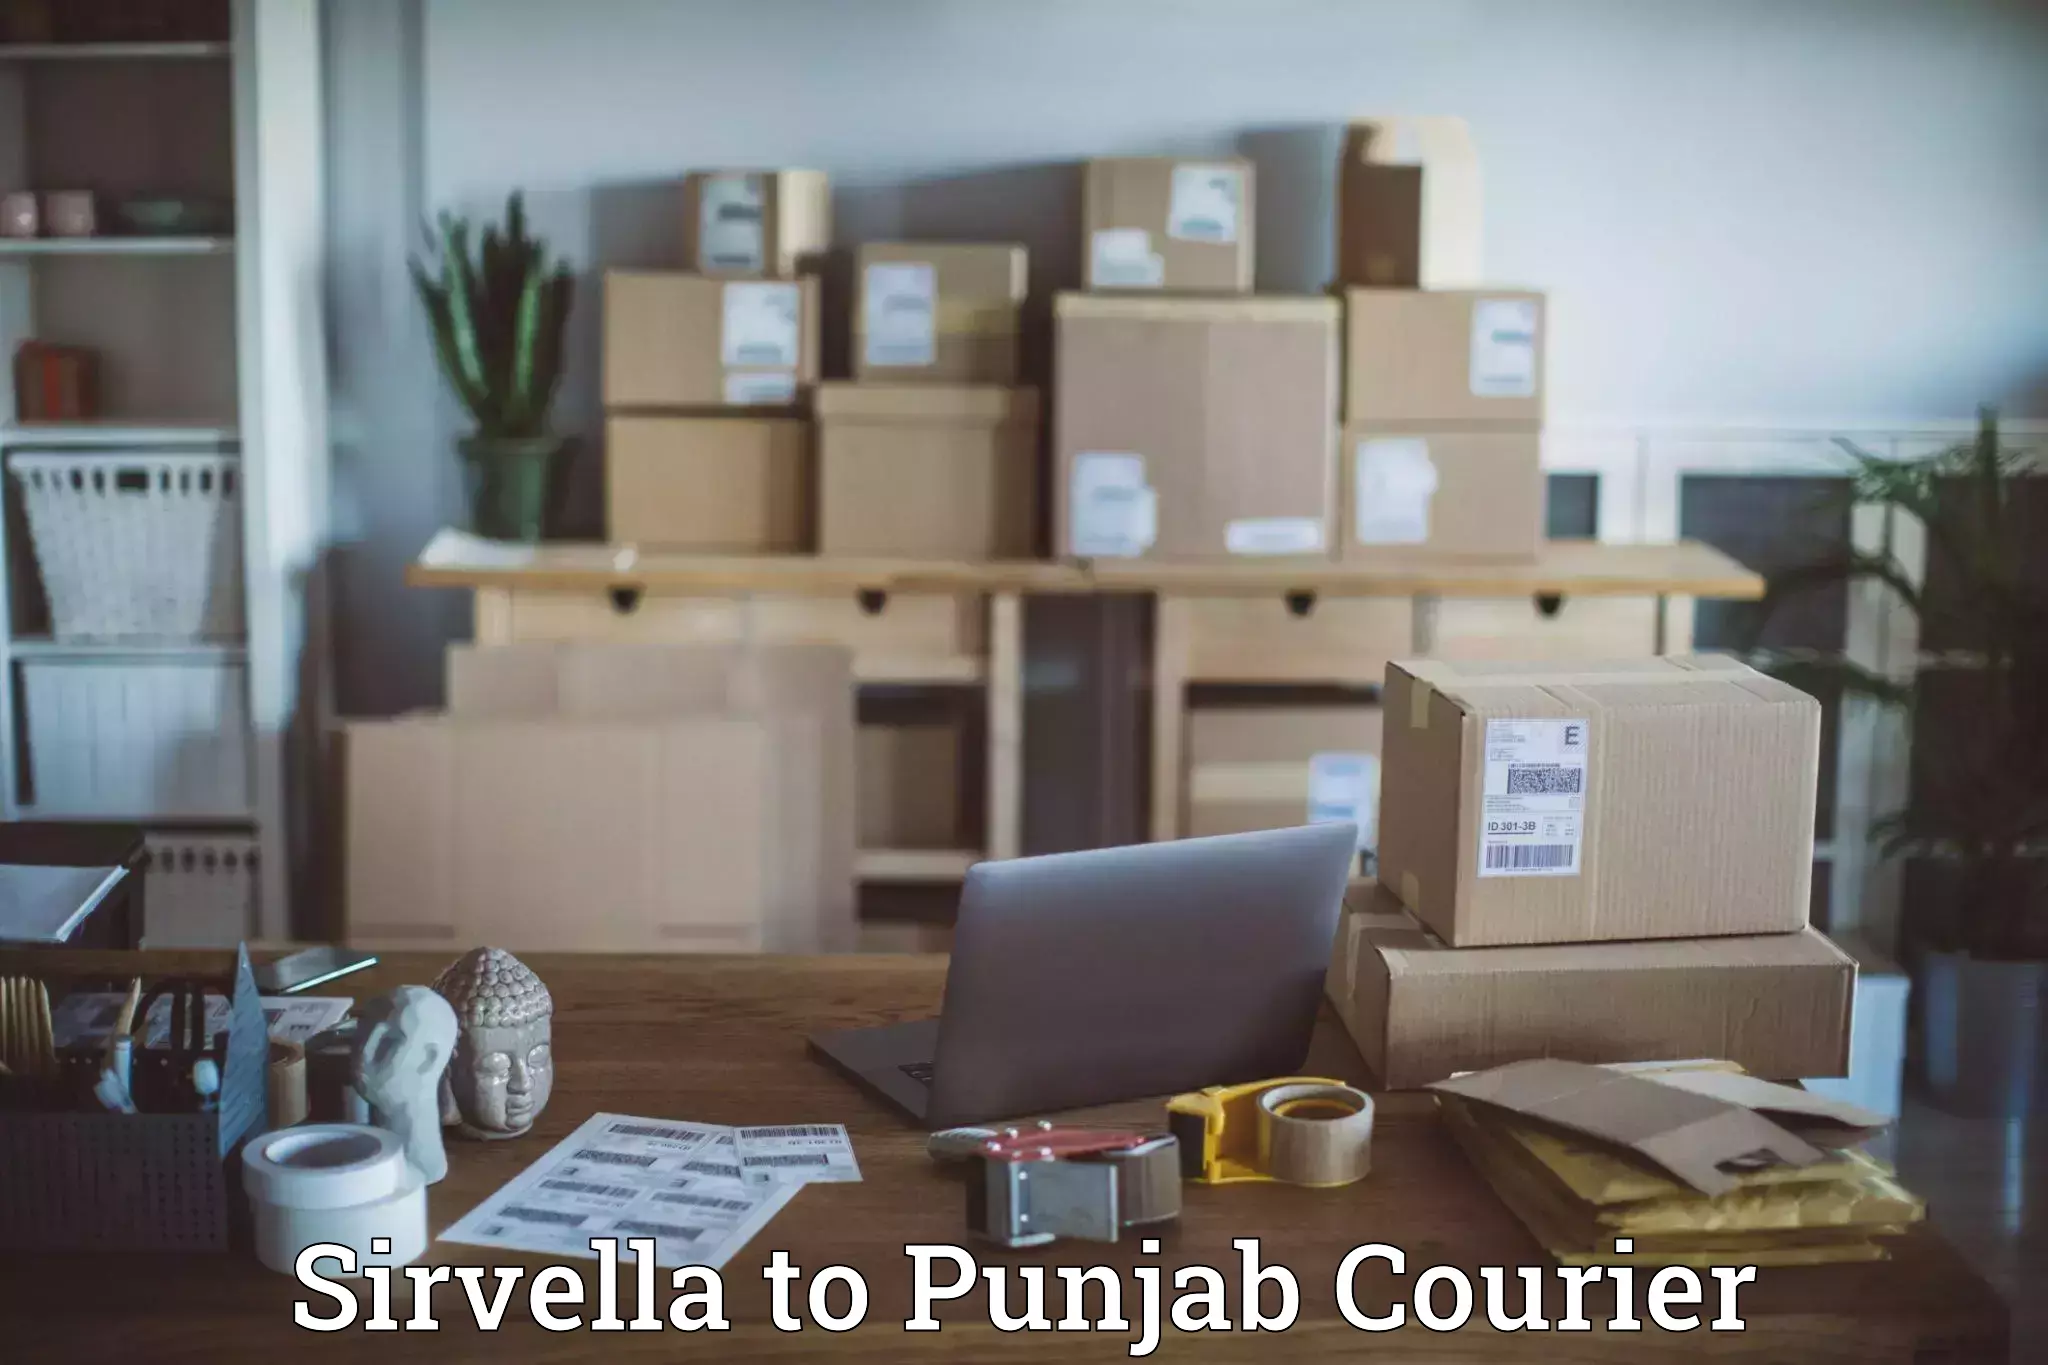 State-of-the-art courier technology in Sirvella to Jalandhar